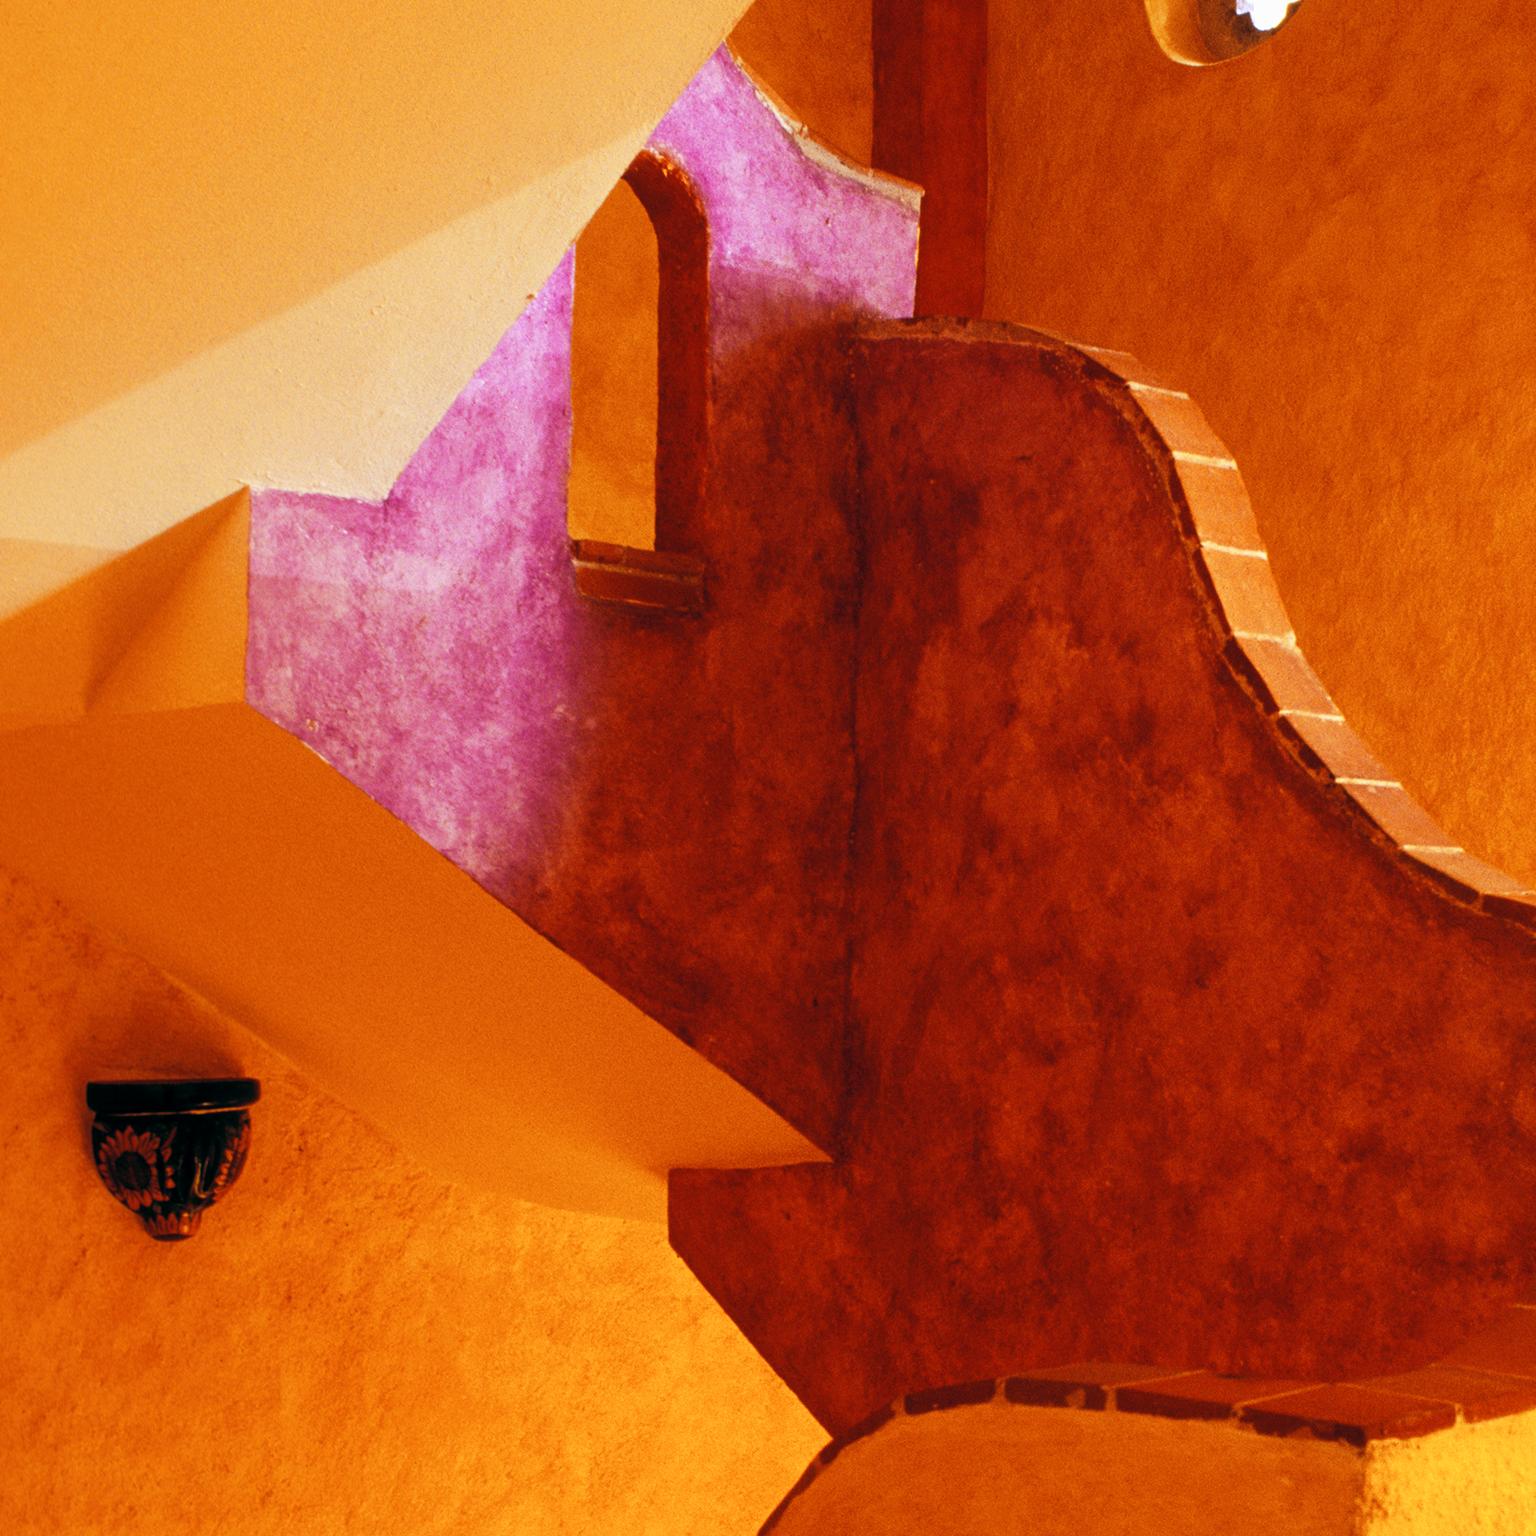 Secret Staircase, Mexico, 2009
Photograph by Cosmo Condina. Interior Staircase,  Playa del Carmen,  Mexico, 2009

Archival pigment print 19 X 12.6 in. Edition of 10. This is # 3/10 in the edition.

Colour photograph in beautiful warm tones of orange